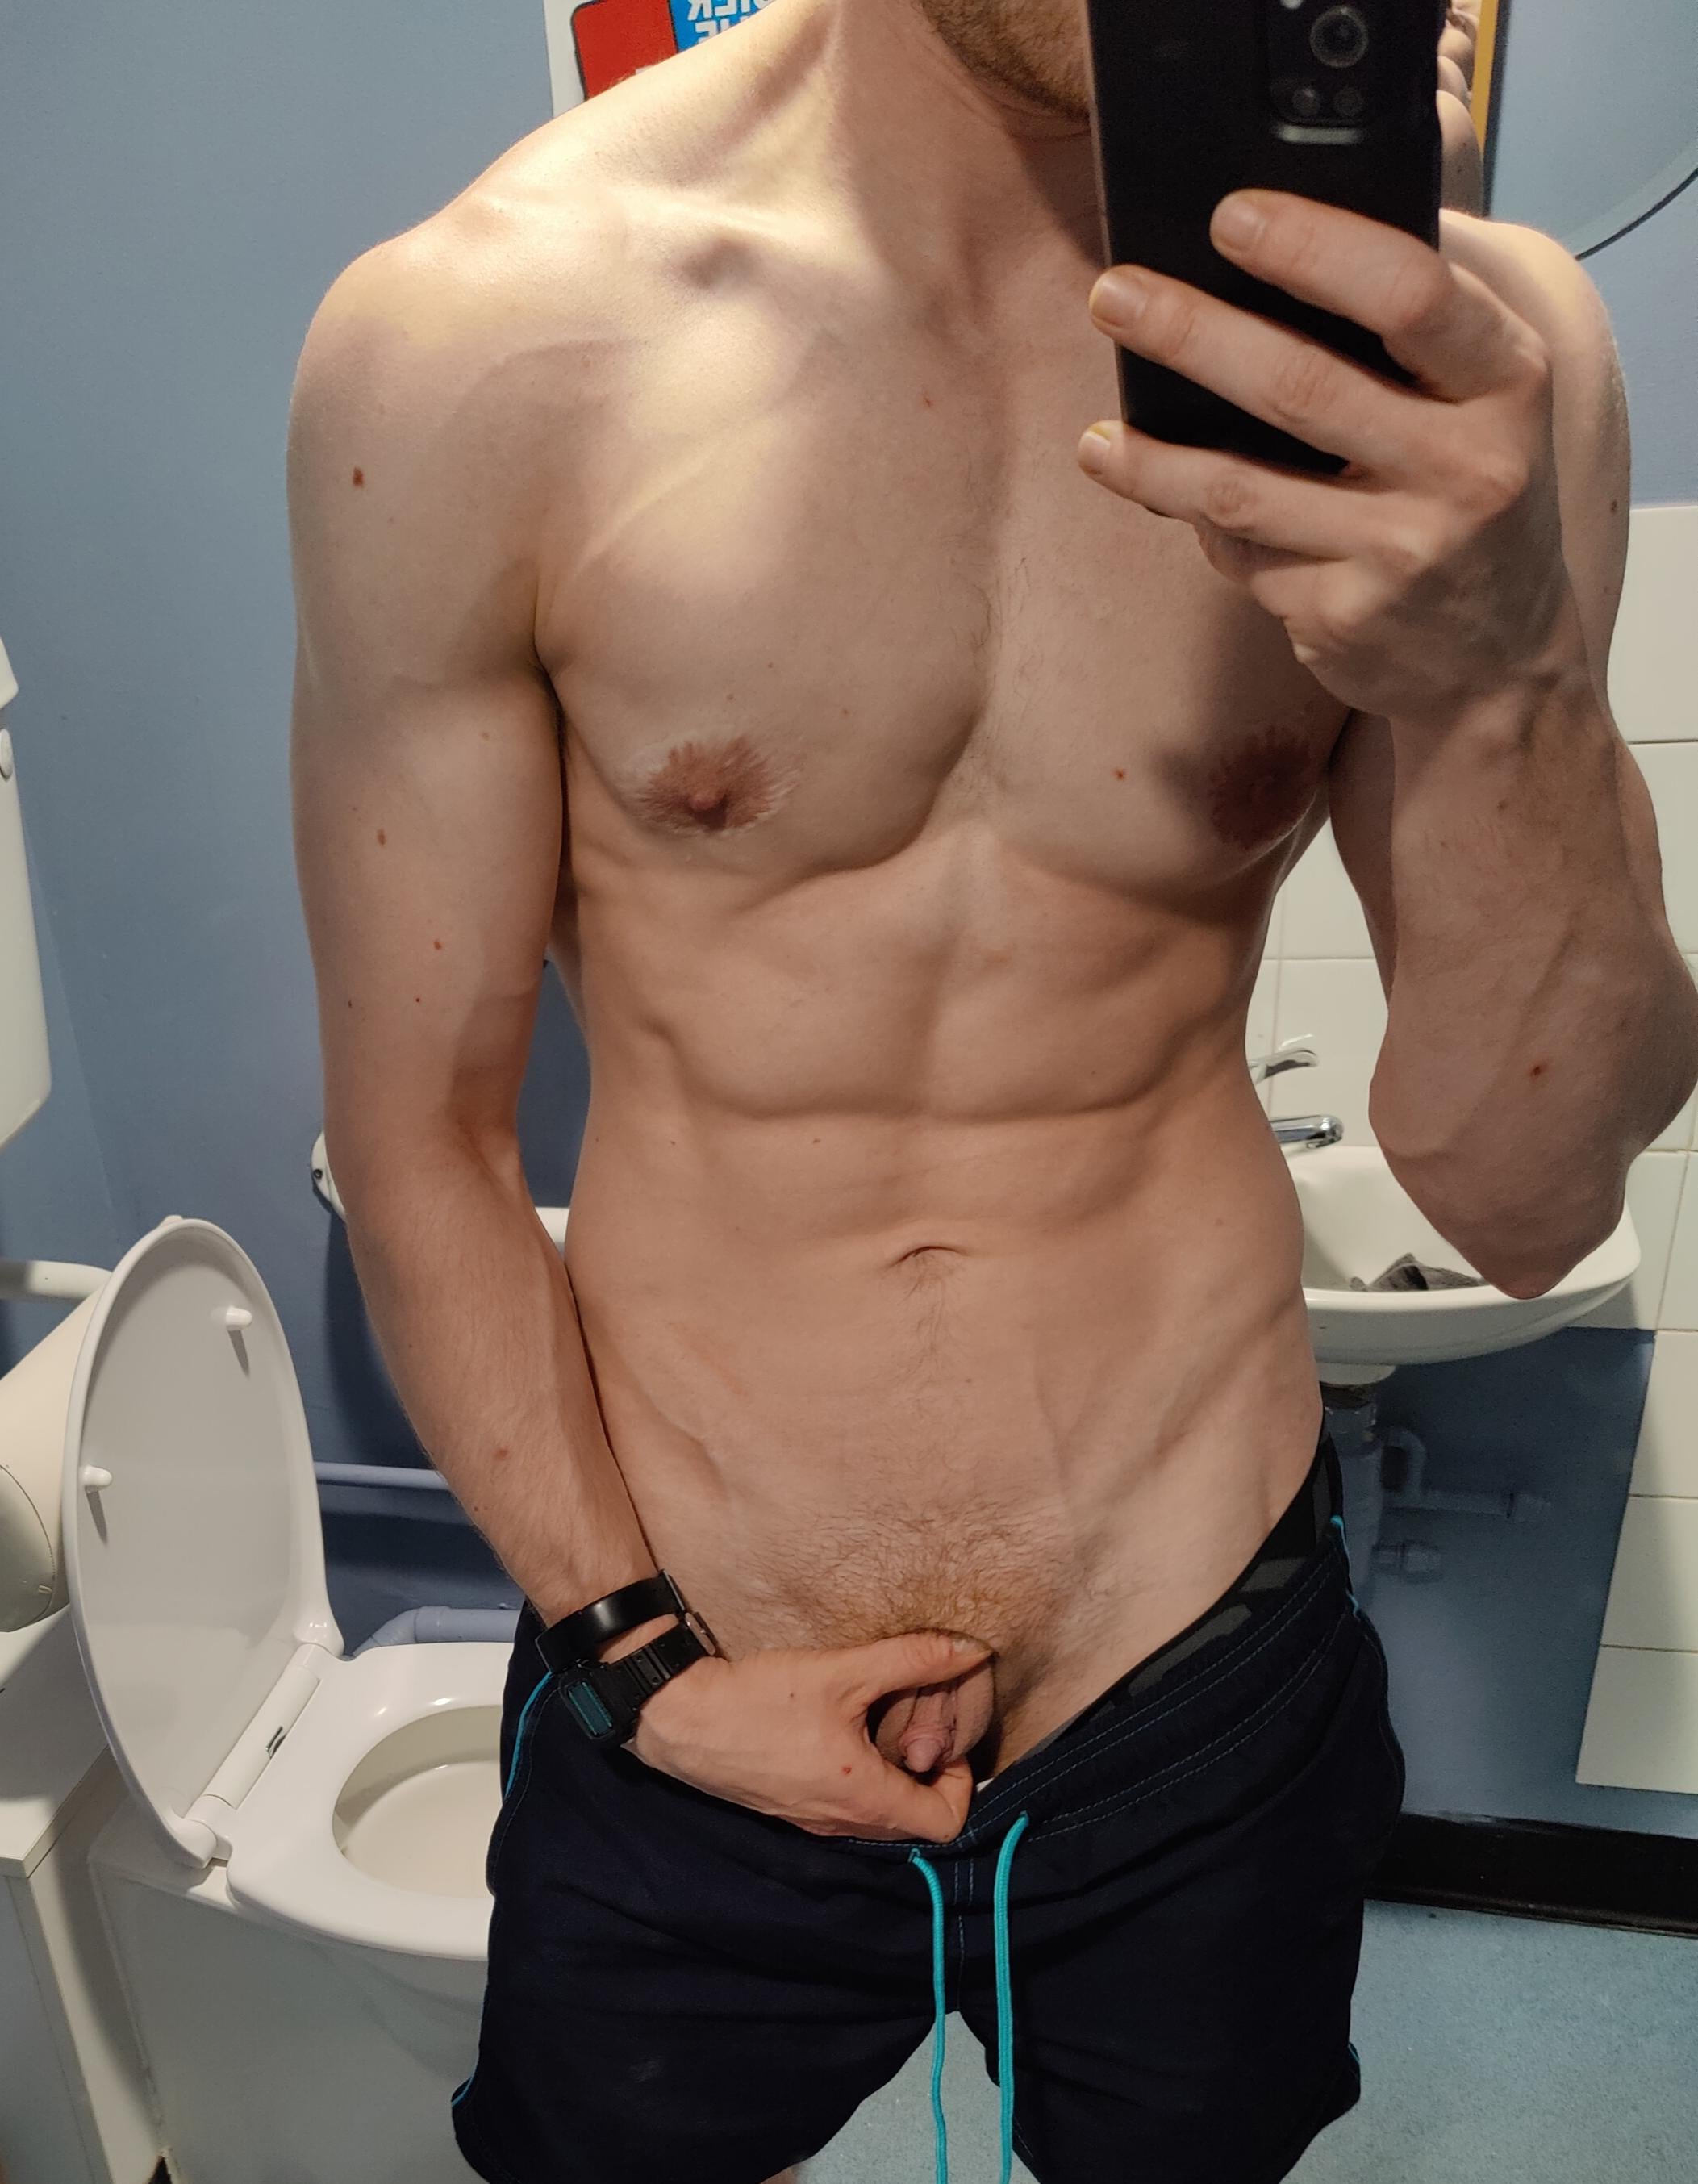 Anyone wanna come suck my cock in the gym bathroom